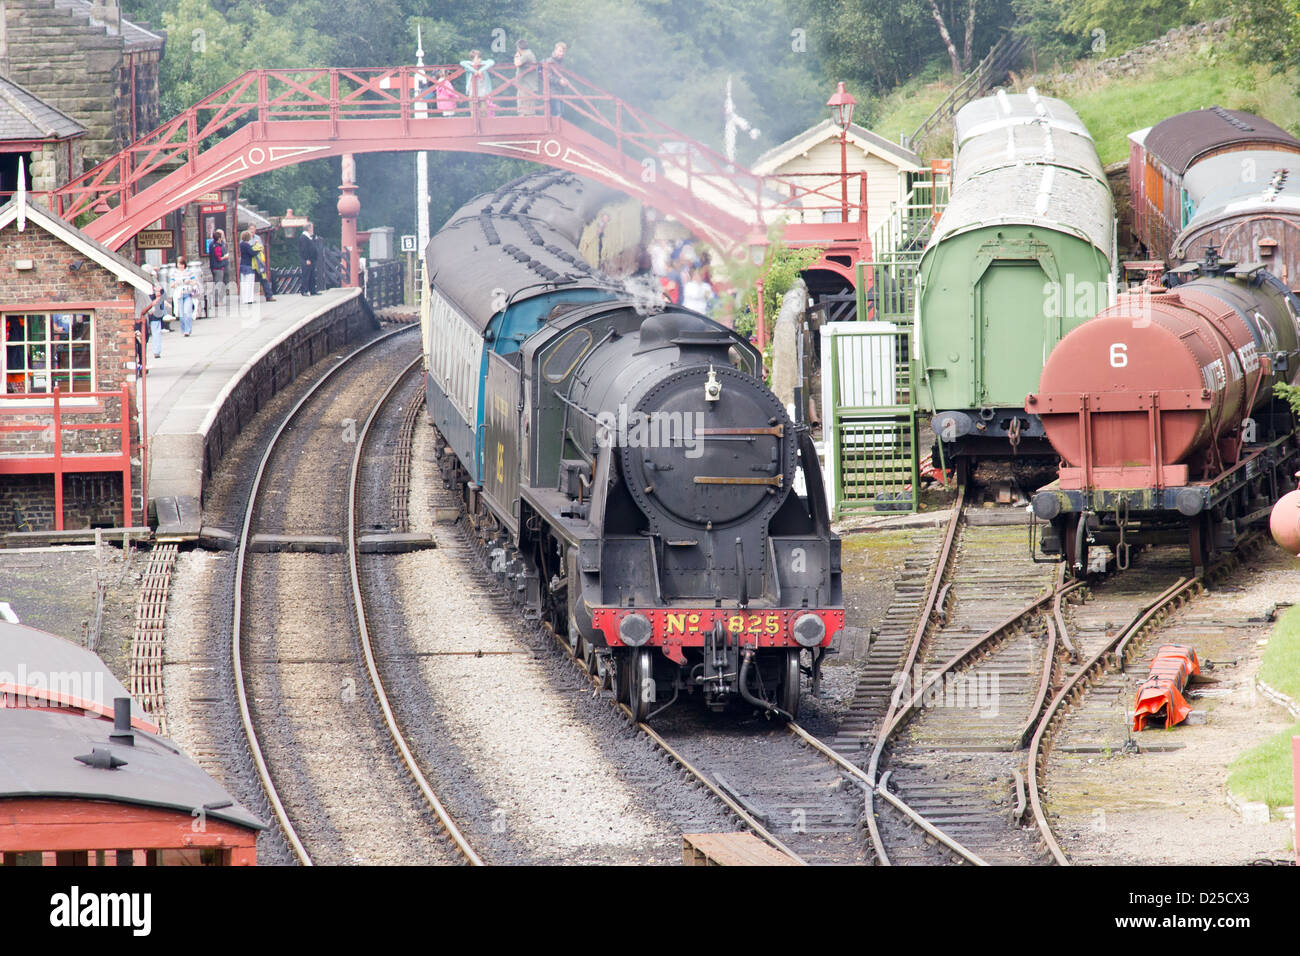 Steam locomotive pulling a passenger train on the North Yorkshire Moors Railway  at Goathland Stock Photo